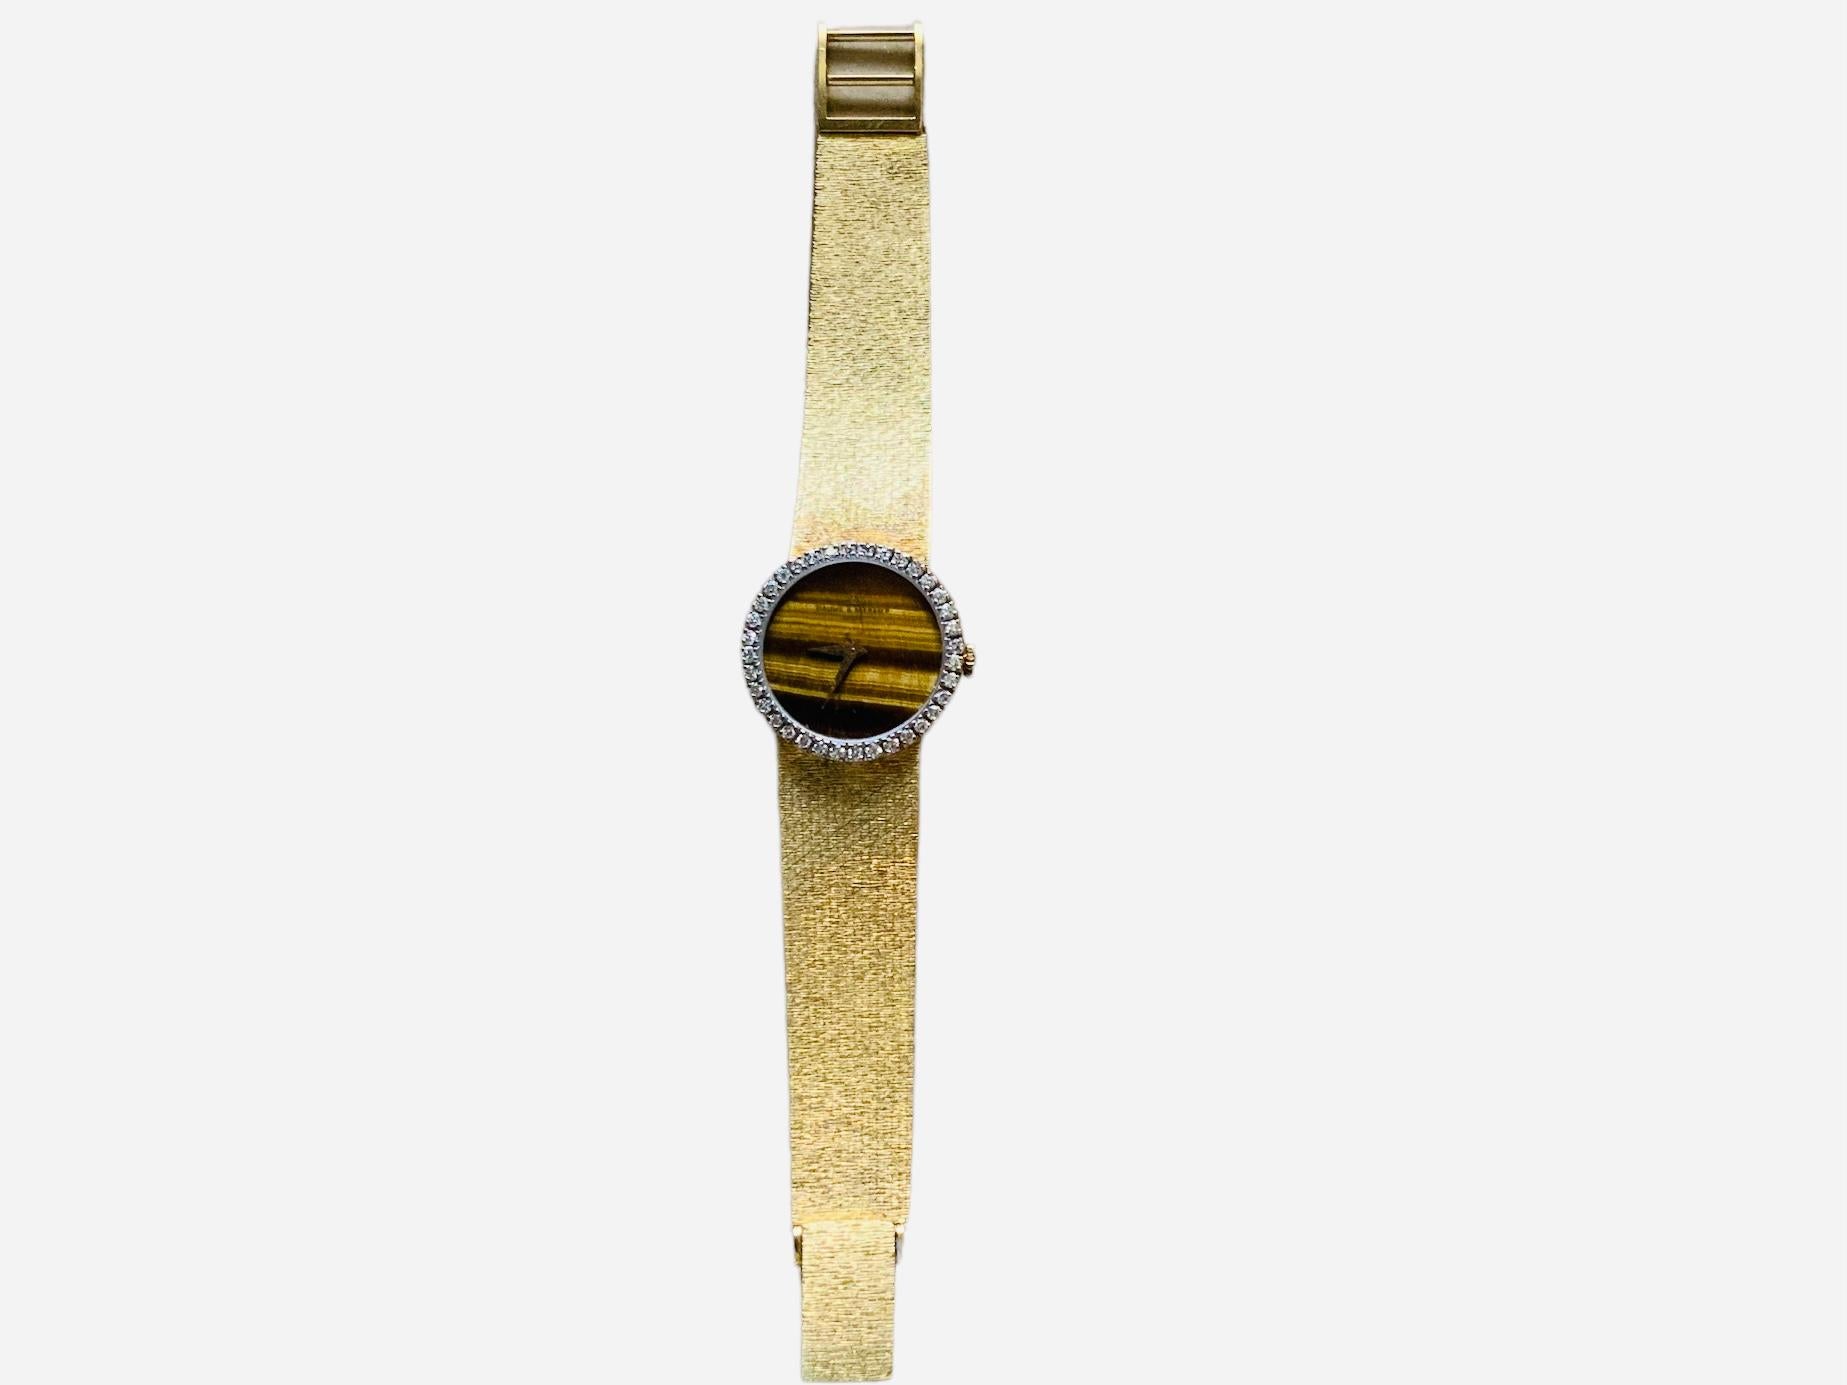 This is a 18K gold Lady’s Baumé & Mercier Watch. It is recognized as an elegant dress watch. It has a manual winding movement. The round dial is made of Tiger Eye and is hallmarked Baume & Mercier , Geneve at the top . It has gold tone minute